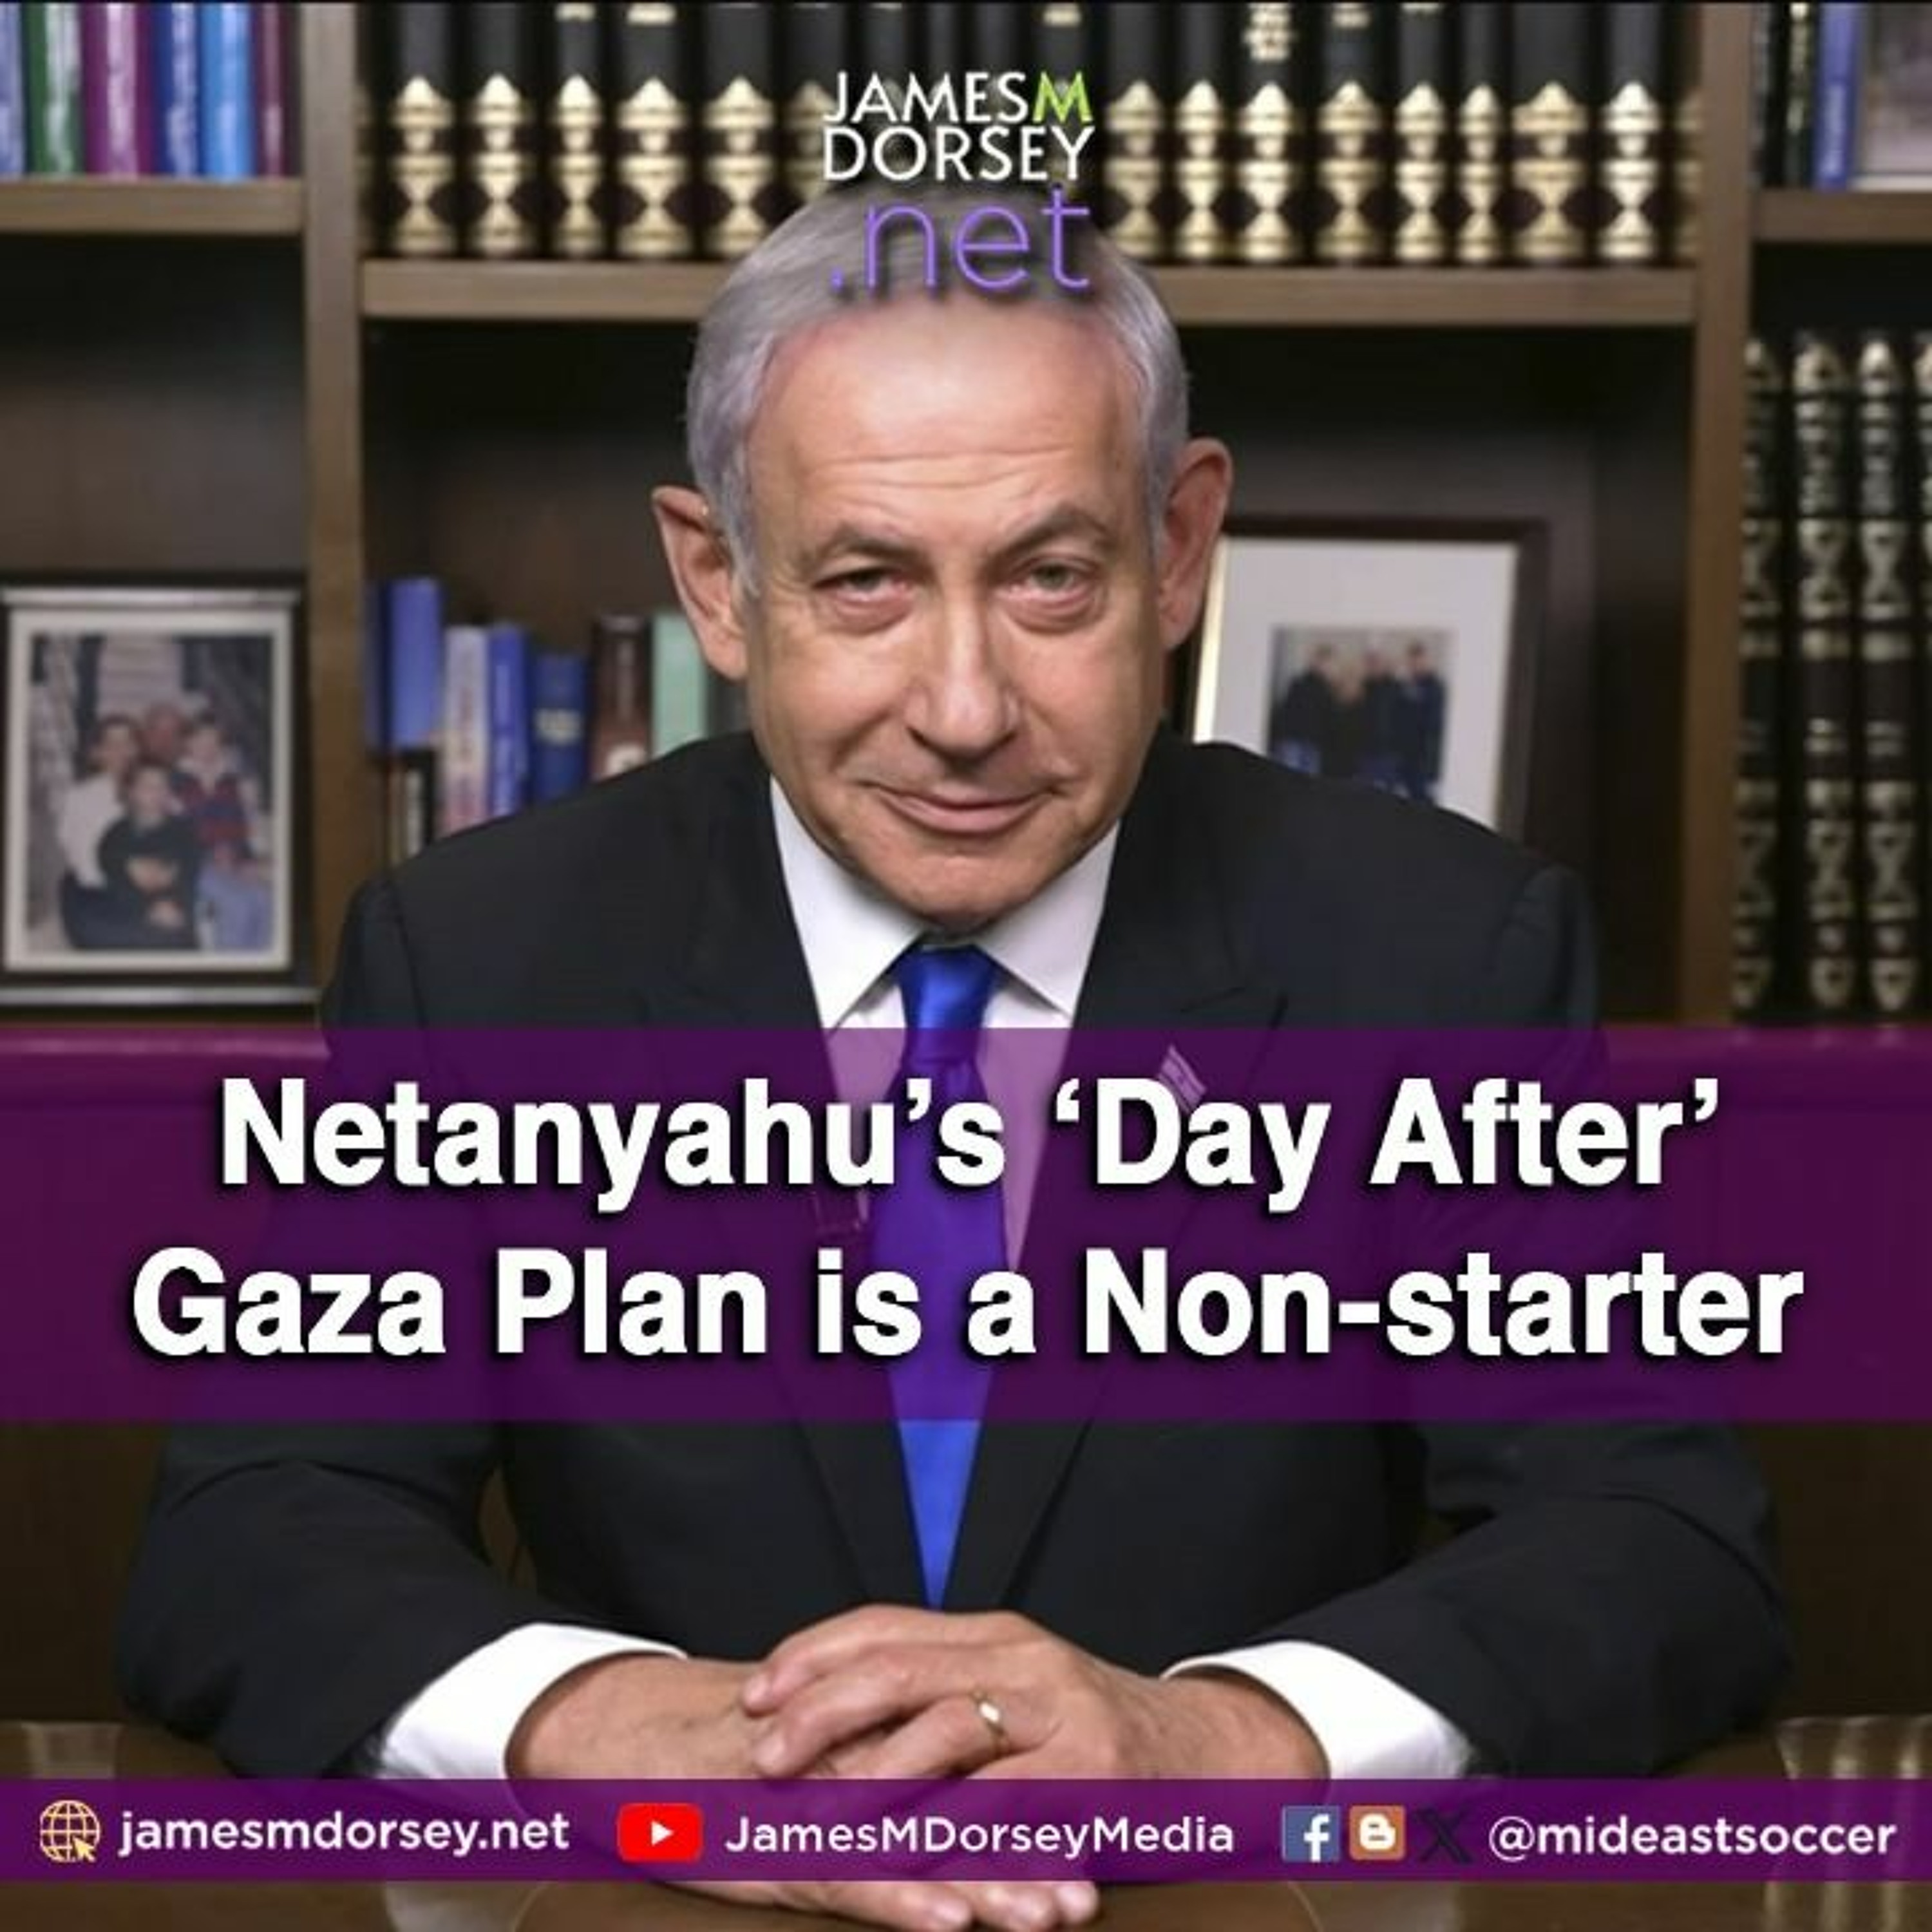 Netanyahu’s ‘Day After’ Gaza Plan Is A Non - Starter